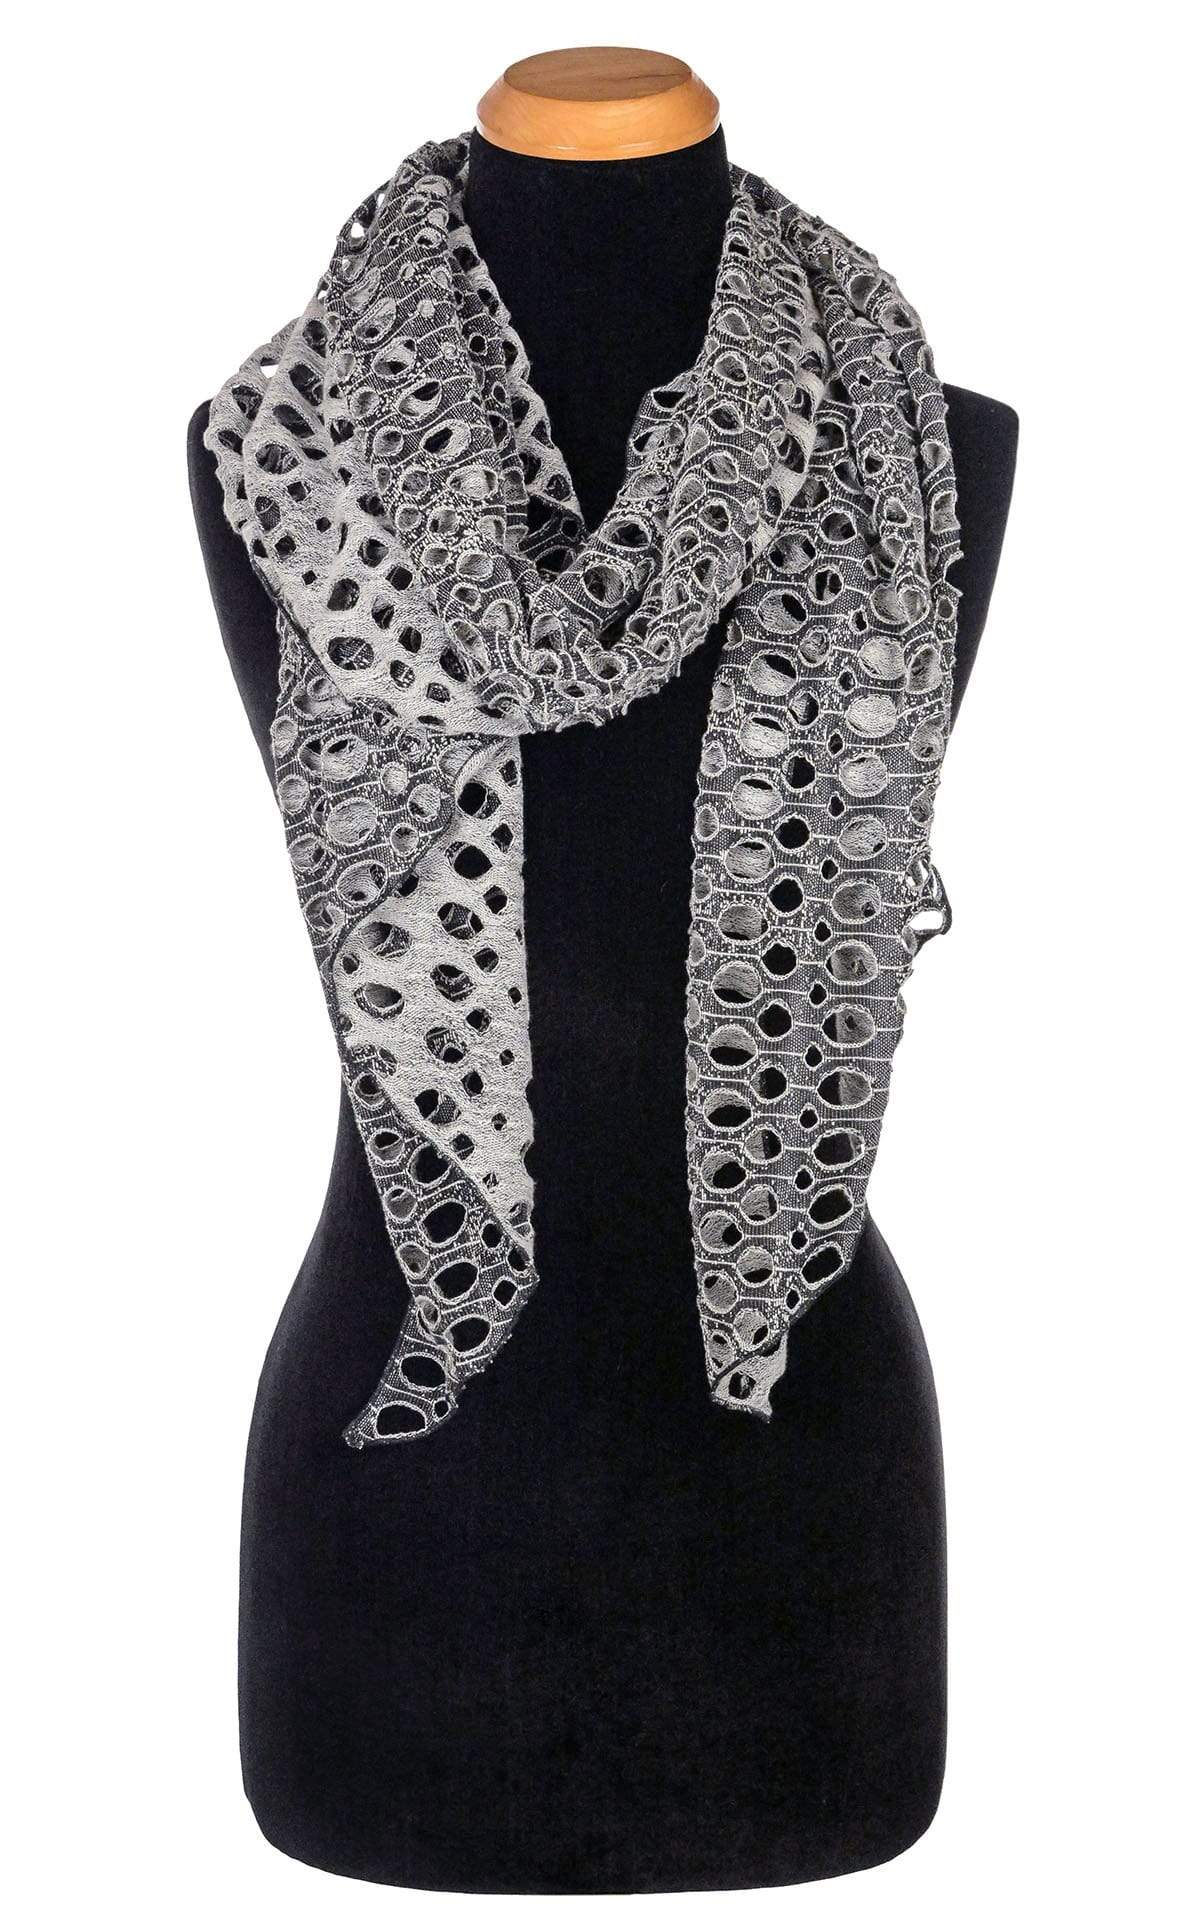 Women’s  Large Handkerchief Scarf, Wrap on Mannequin shown looped in half around neck | Lunar Landing, a black and neutral knit with curled edges surrounding holes| Handmade in Seattle WA | Pandemonium Millinery